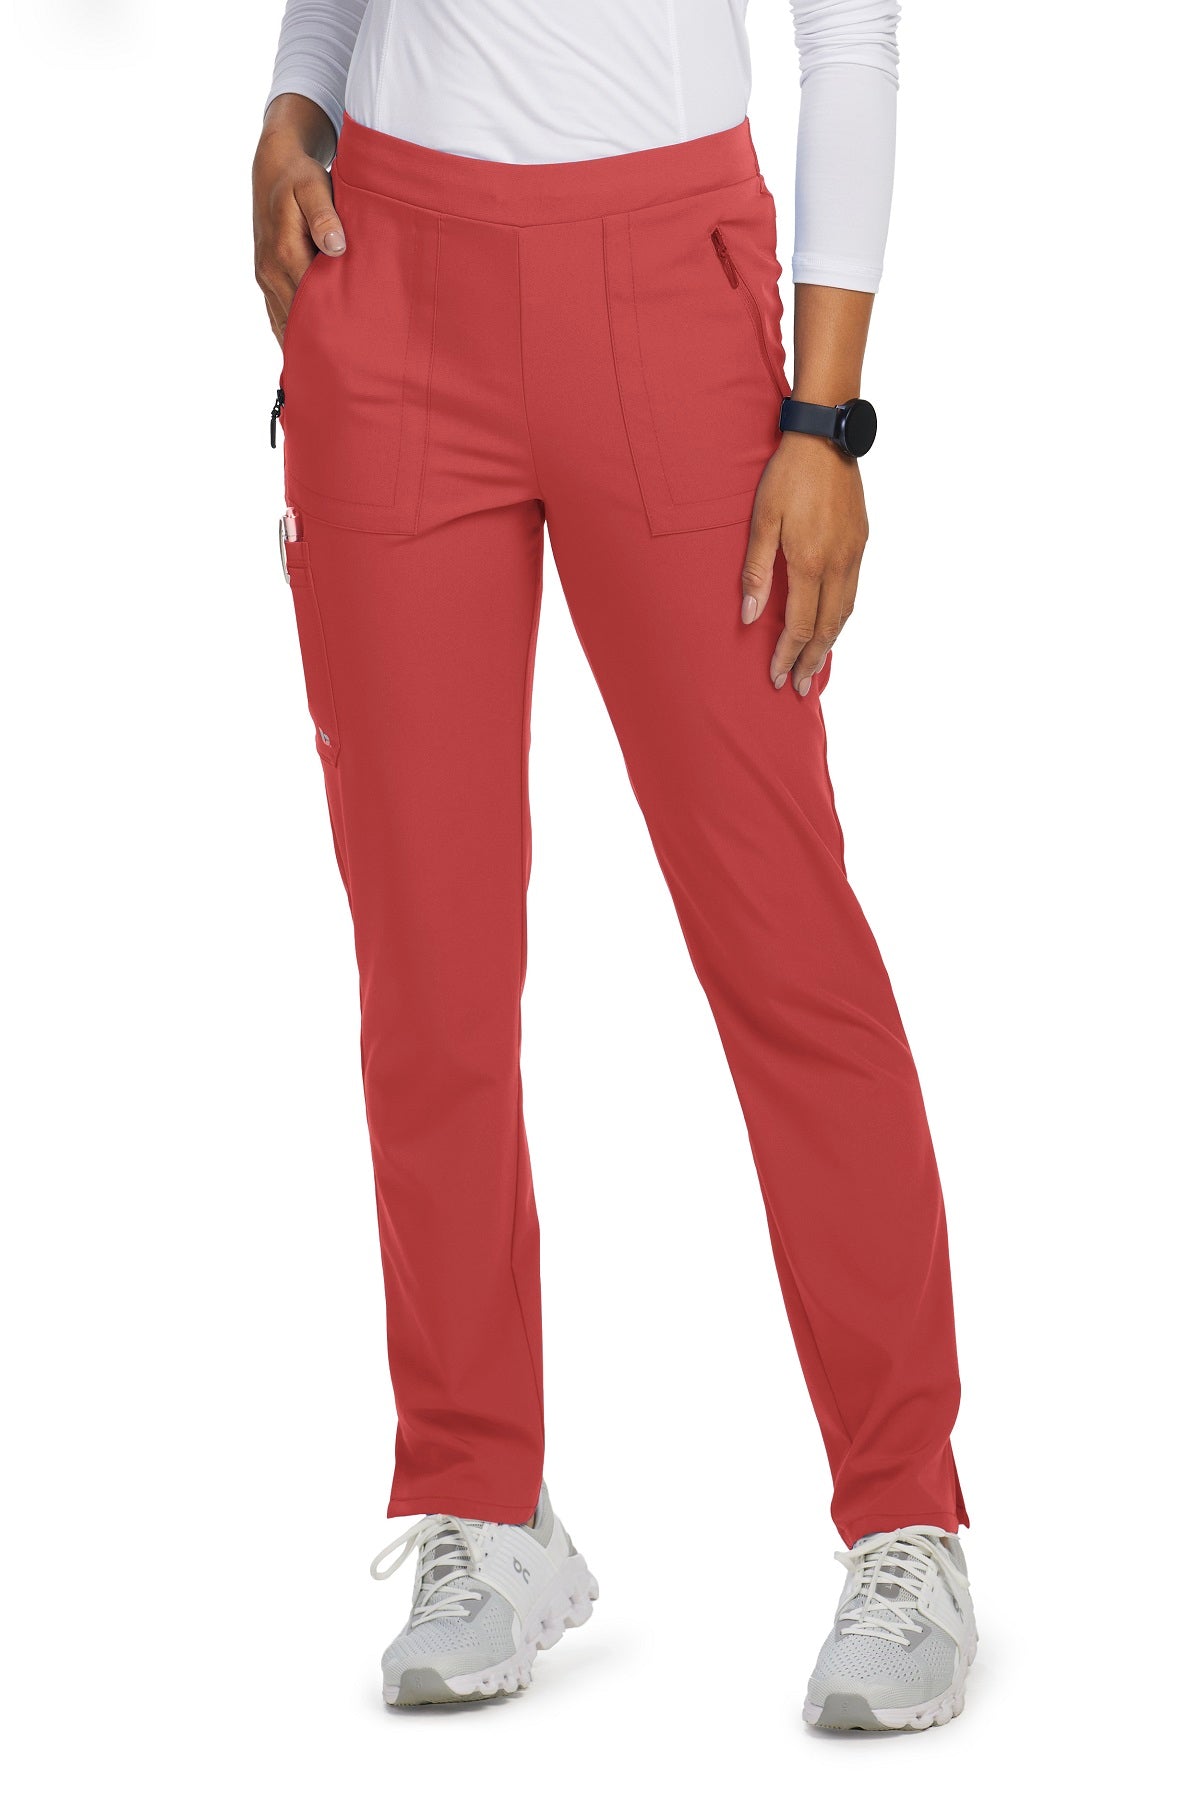 Barco Unify Petite Scrub Pants Purpose 5 Pocket in Dusty Red at Parker's Clothing and Shoes.